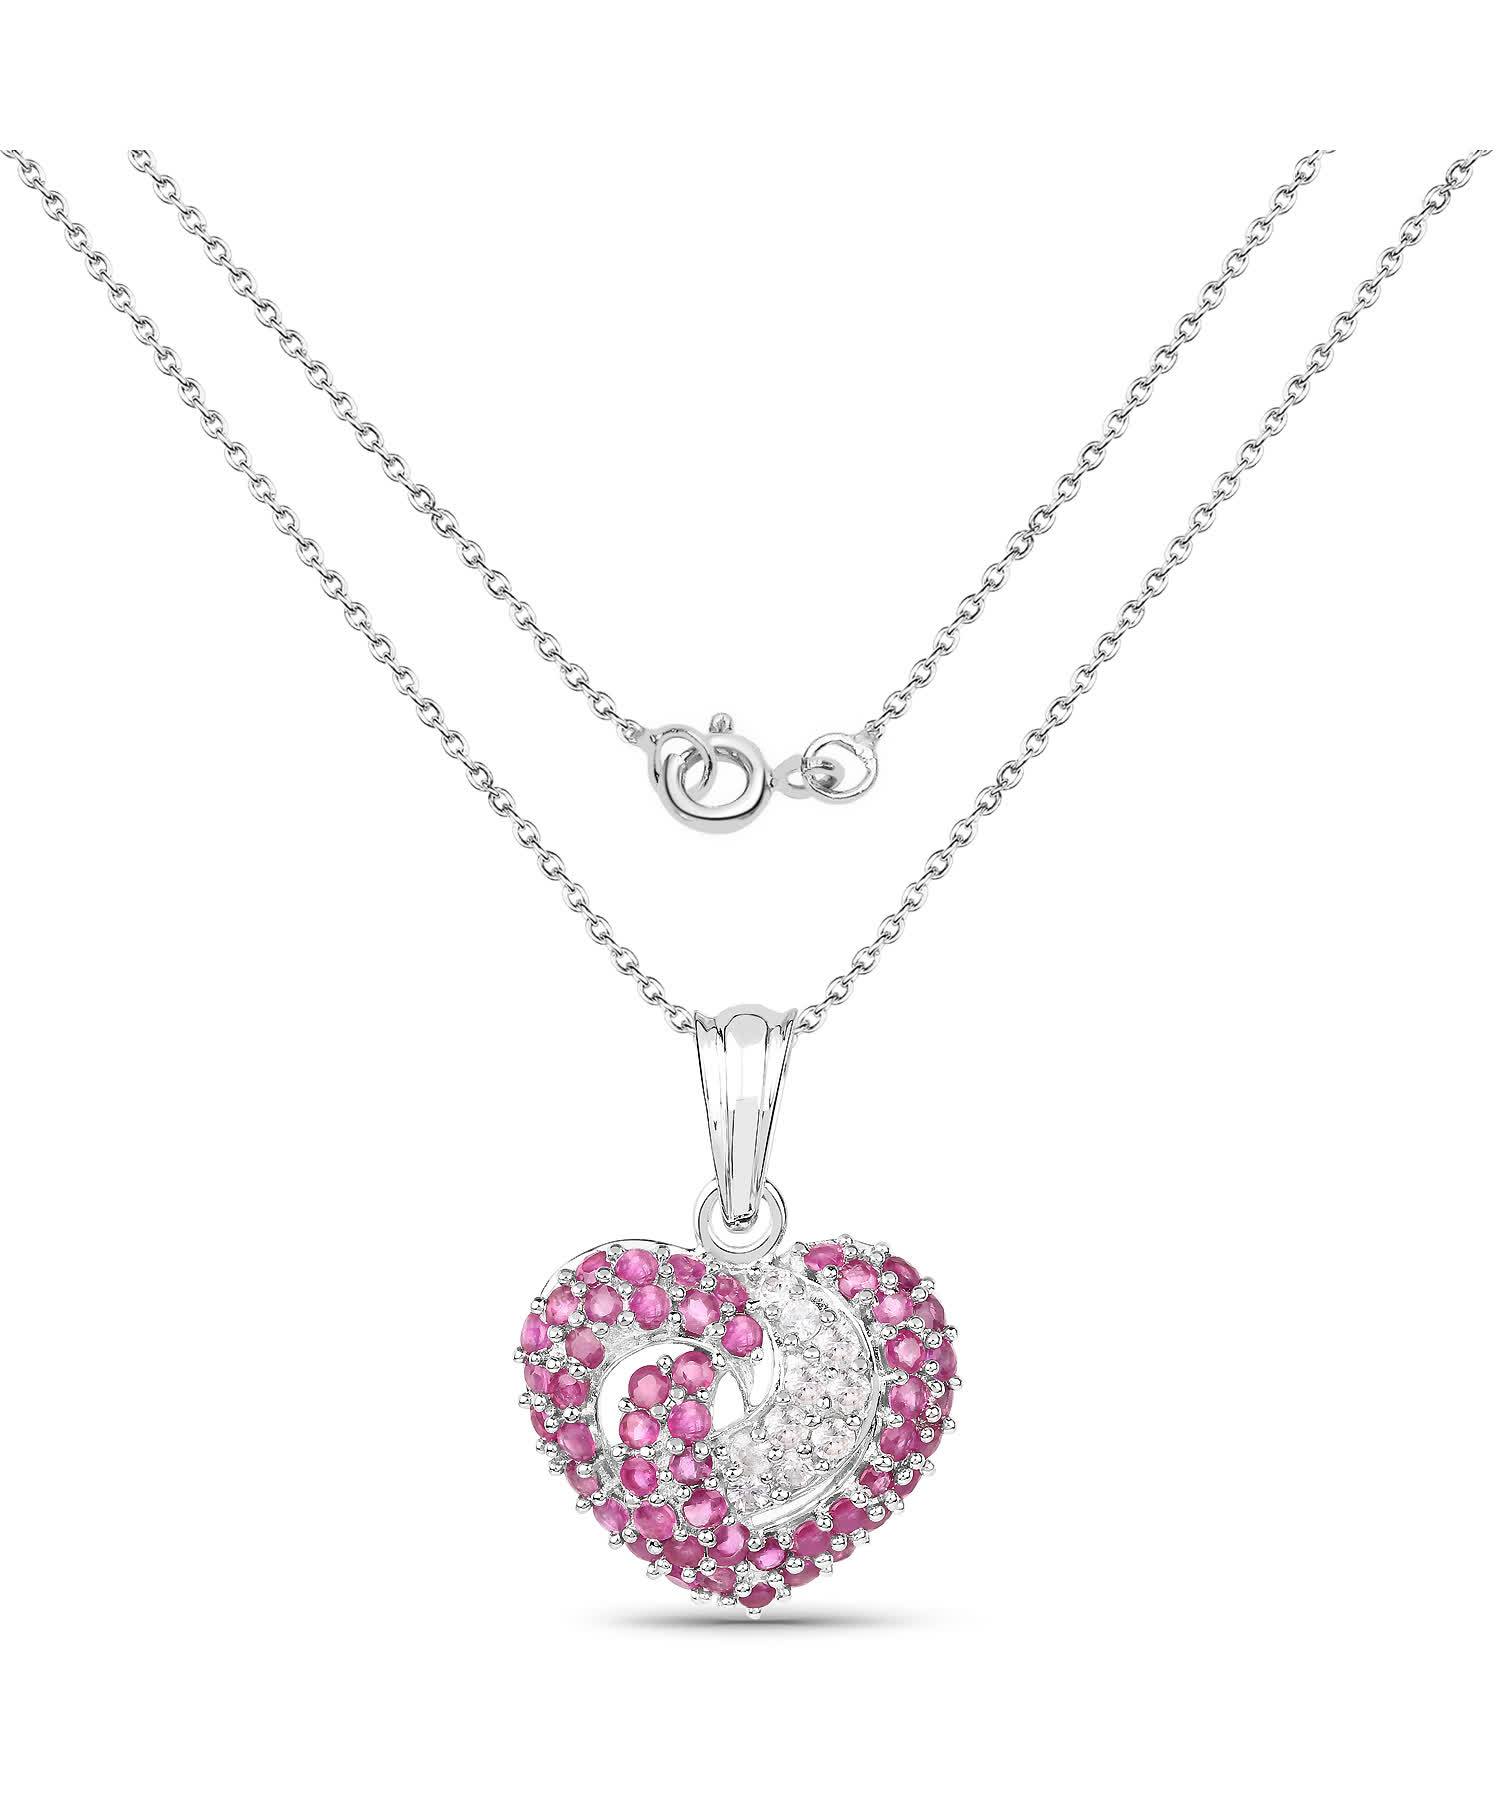 2.75ctw Natural Ruby and White Sapphire Rhodium Plated 925 Sterling Silver Heart Pendant With Chain View 2